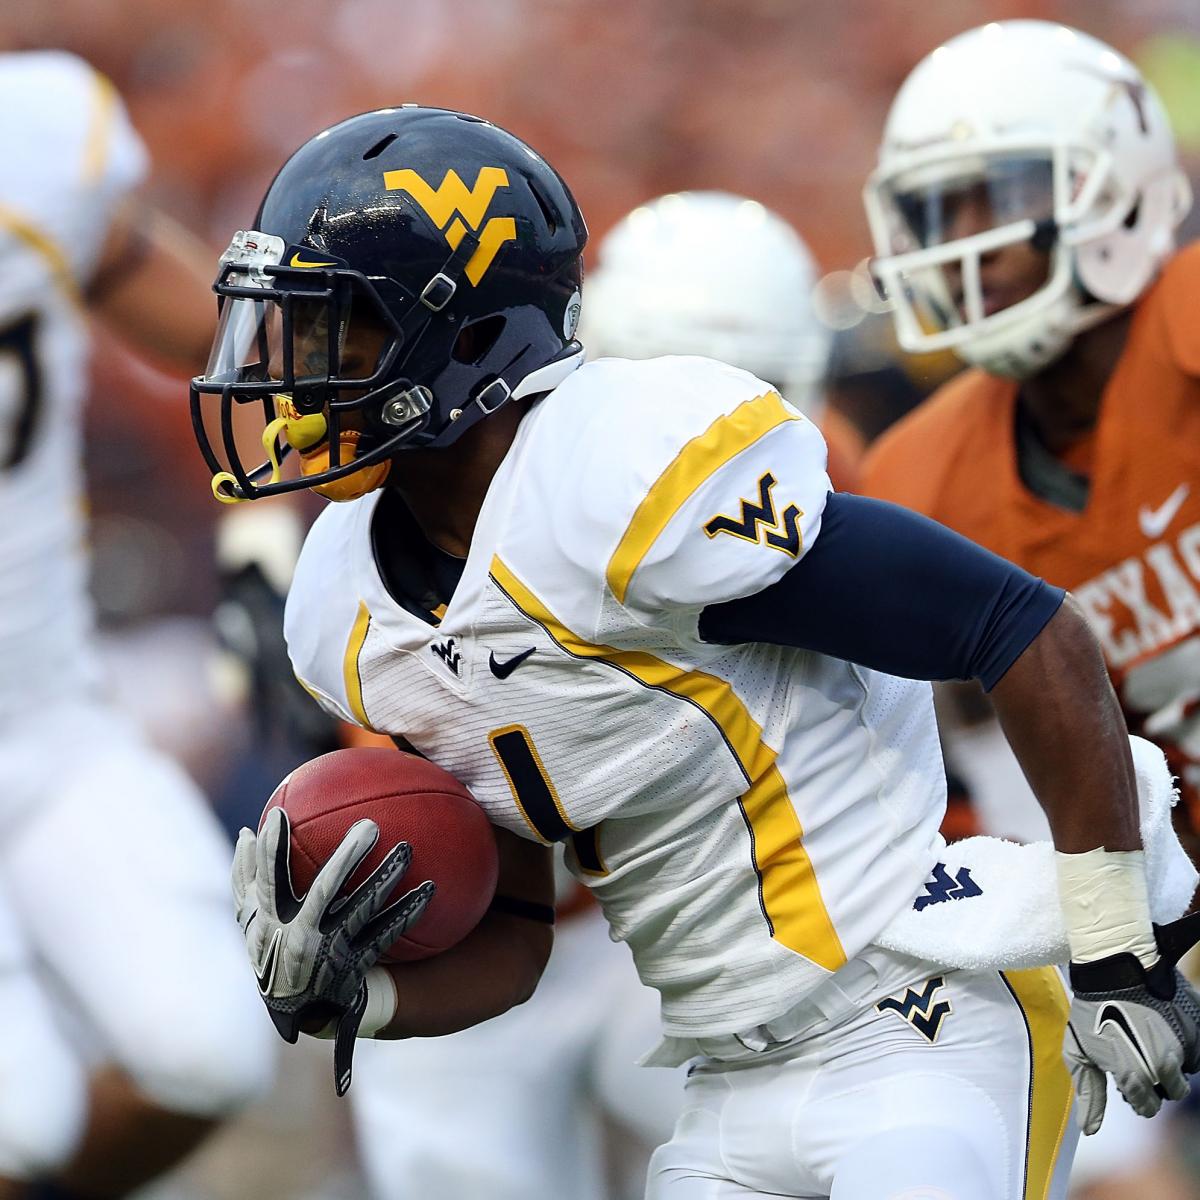 West Virginia Vs Texas Live Scores Analysis And Results News Scores Highlights Stats 